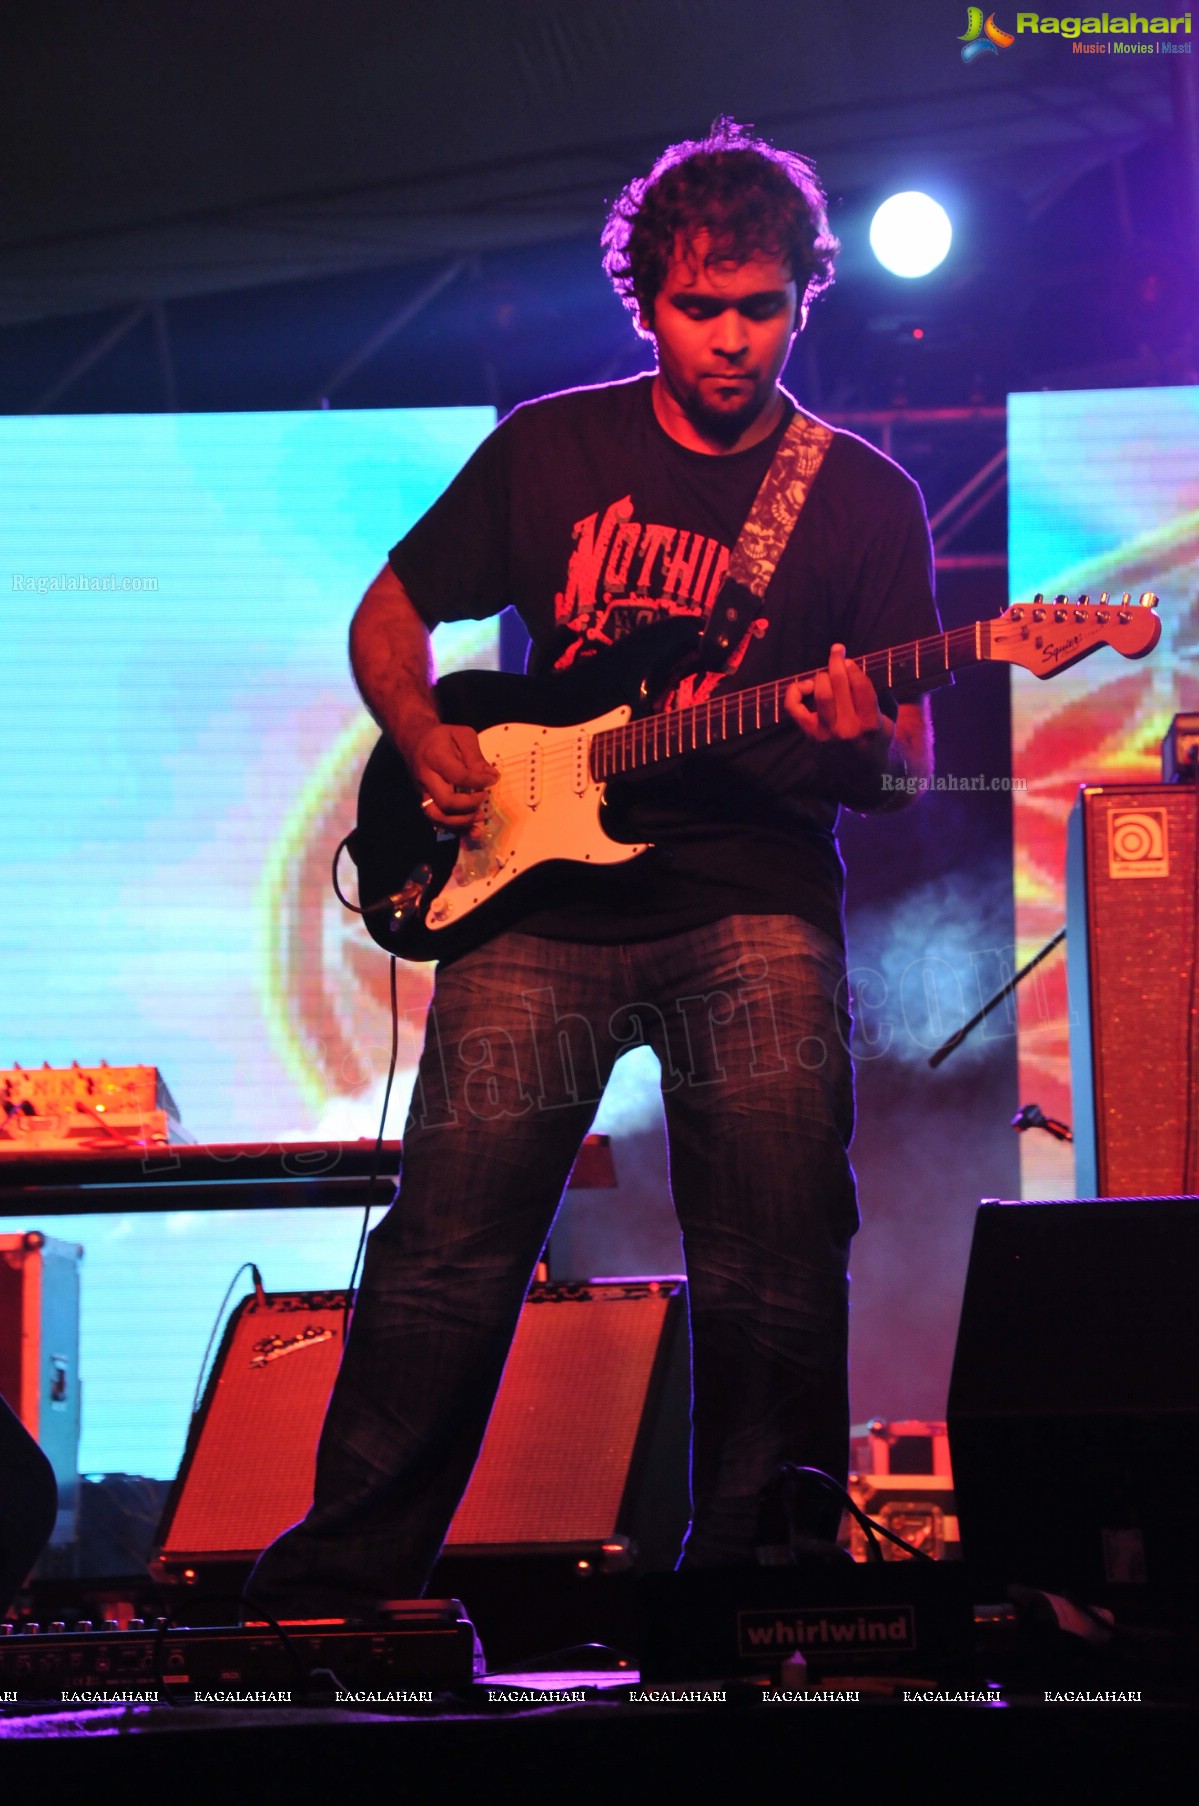 Kingfisher Premium – The Great Indian Octoberfest 2012, Hyderabad (Day 3)